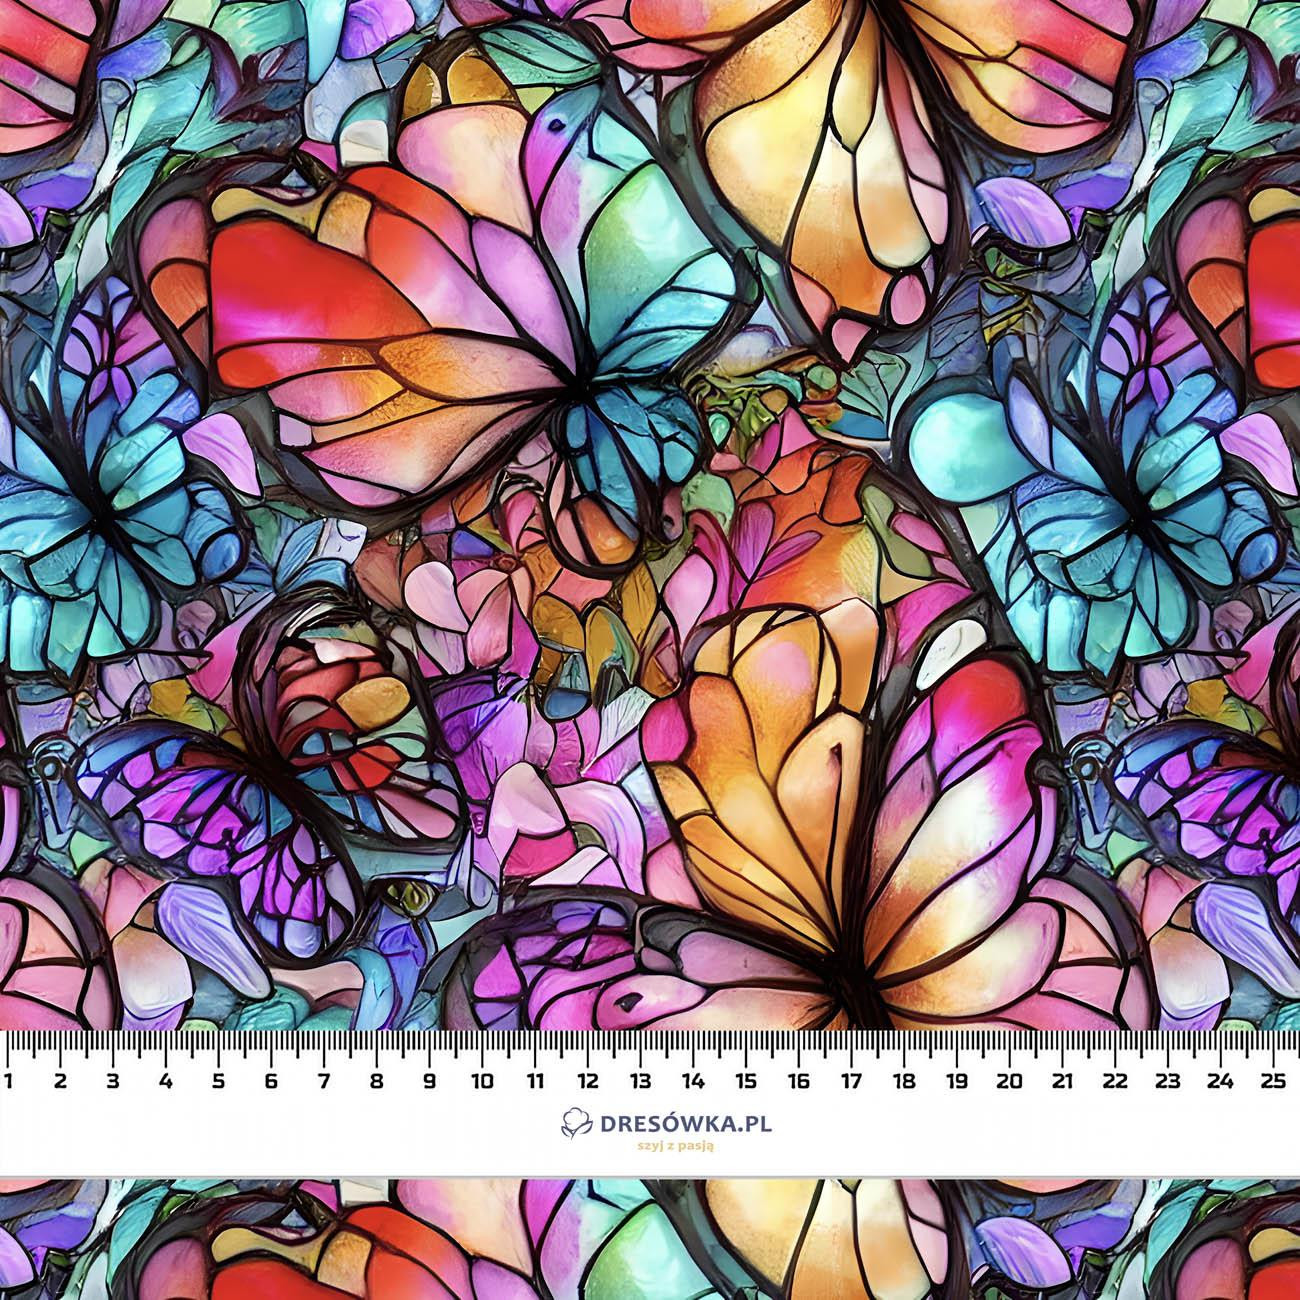 BUTTERFLIES / STAINED GLASS